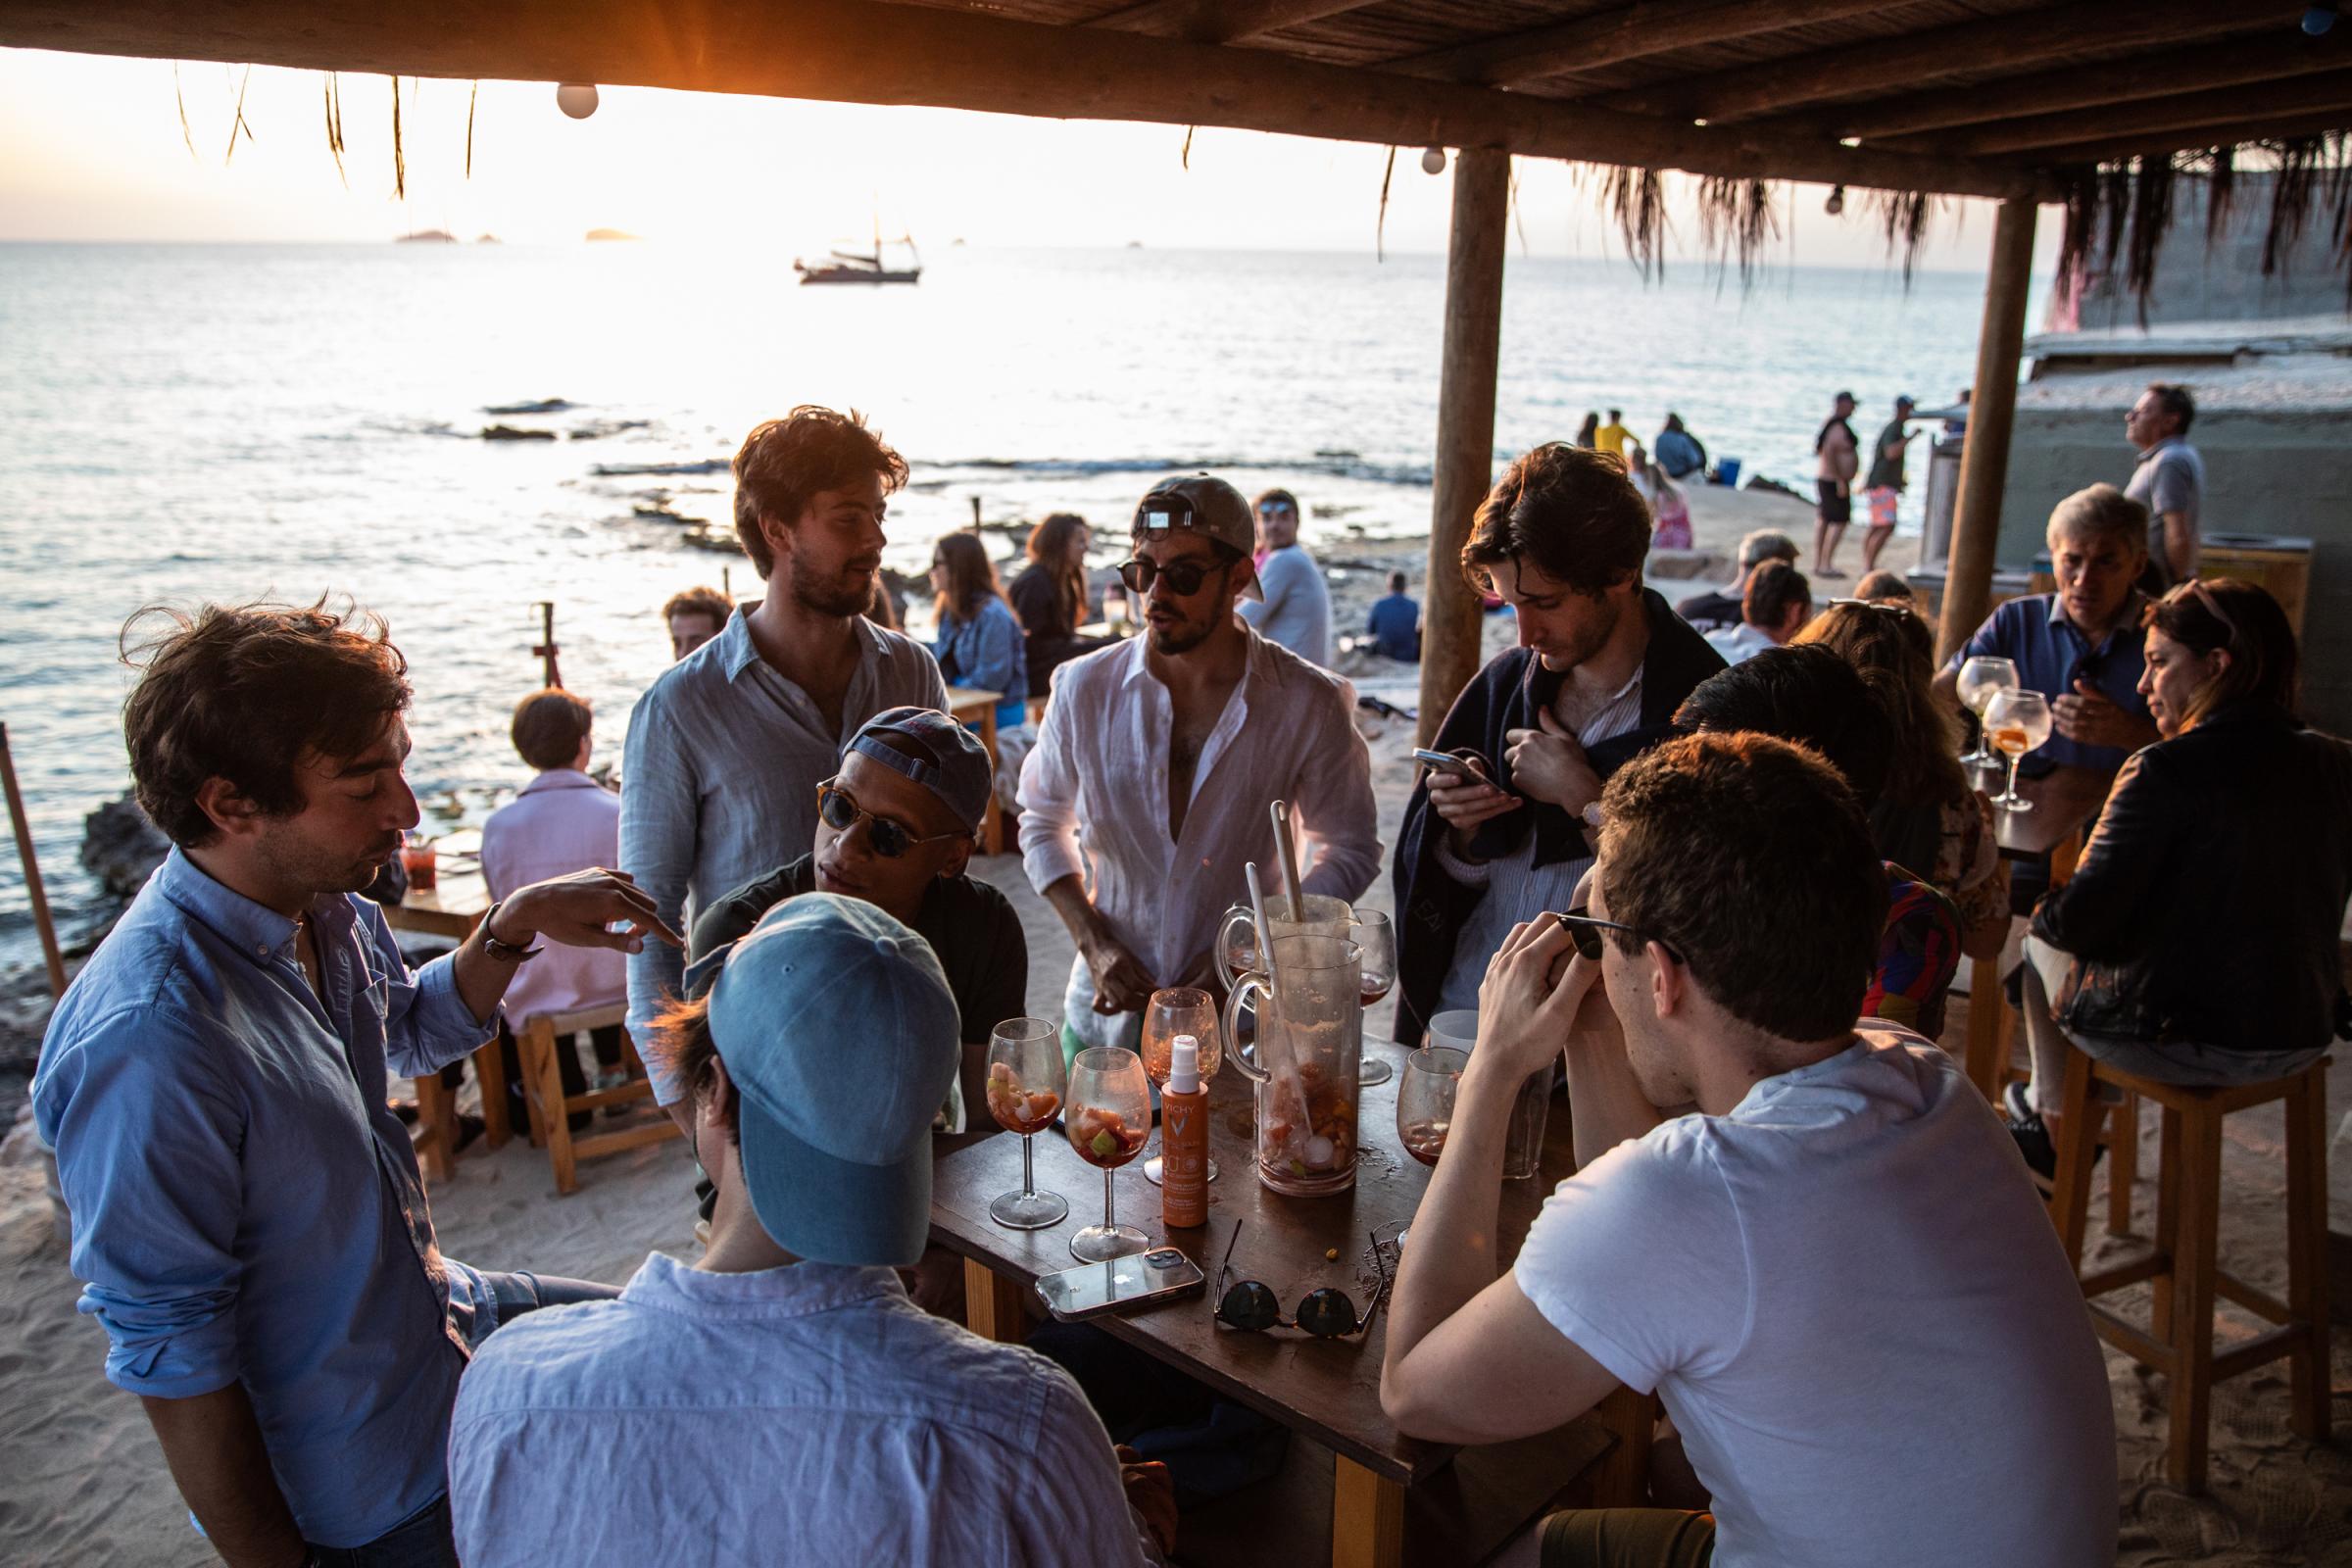 Grand Opening At Pacha Ibiza Heralds A Pre-Pandemic Party Season - French tourists enjoy the sunset at cala Escondida...